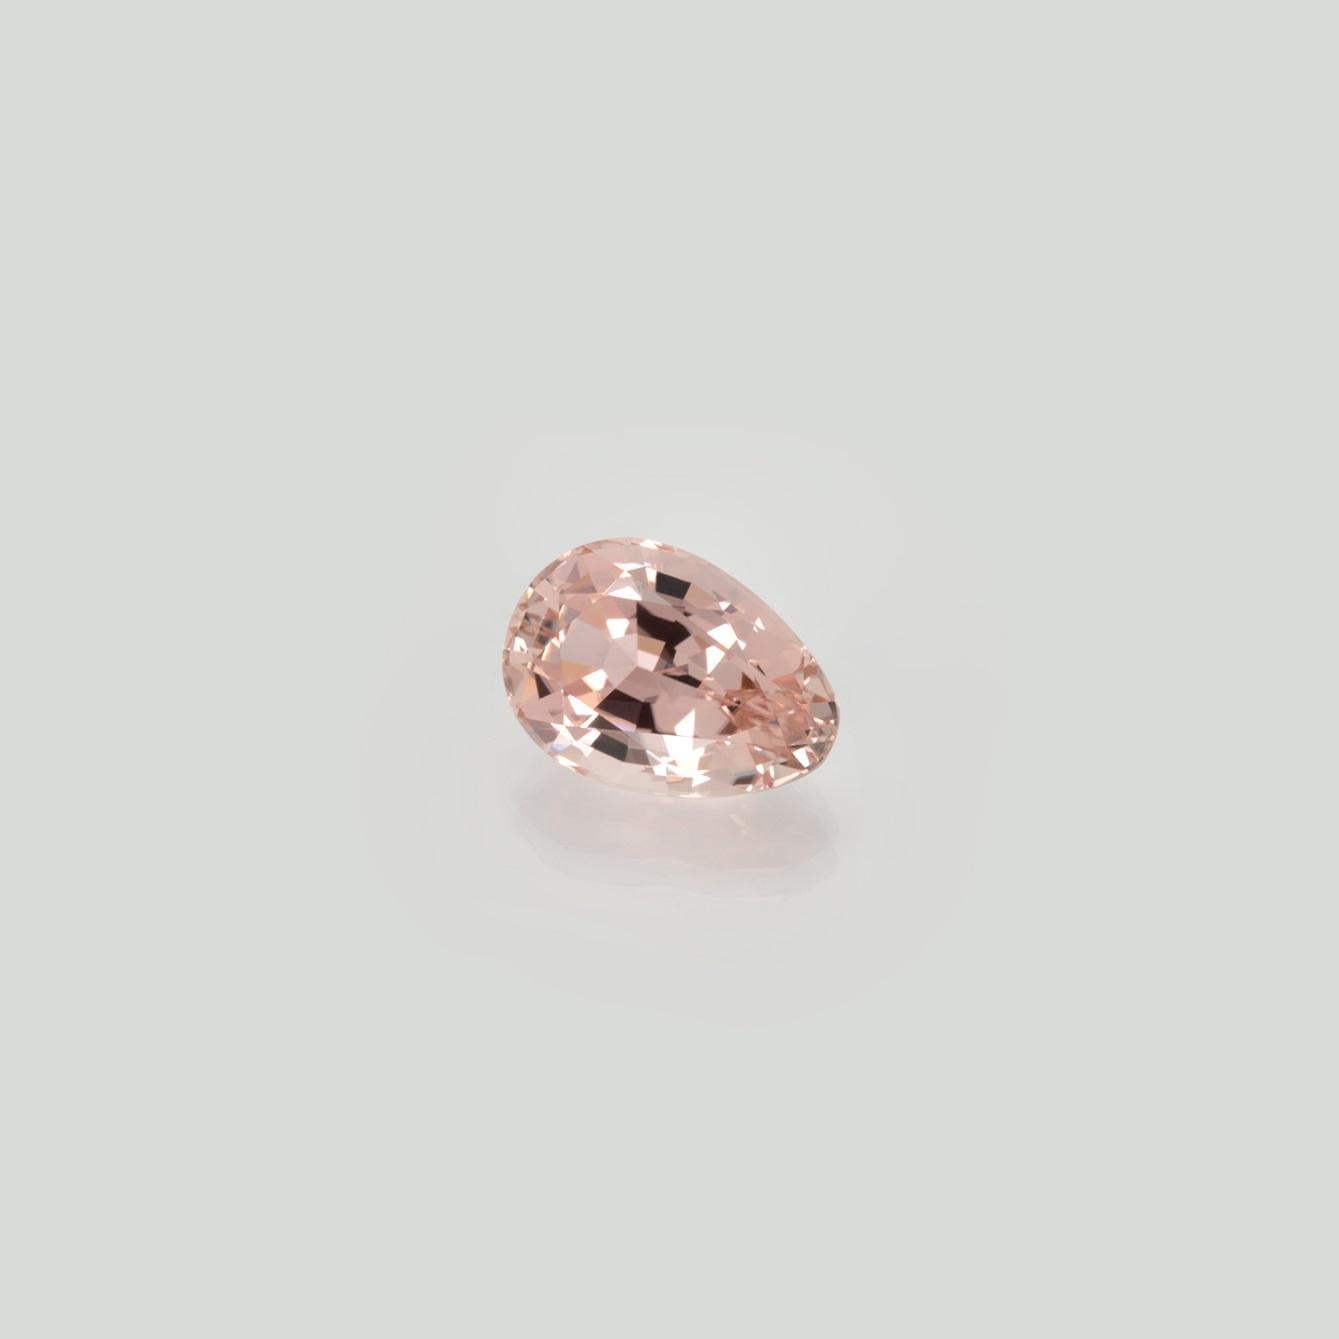 Exquisite 10.36 carat Peach Tourmaline antique pear shape gem, offered loose to a gemstone lover.
Returns are accepted and paid by us within 7 days of delivery.
We offer supreme custom jewelry work upon request. Please contact us for more